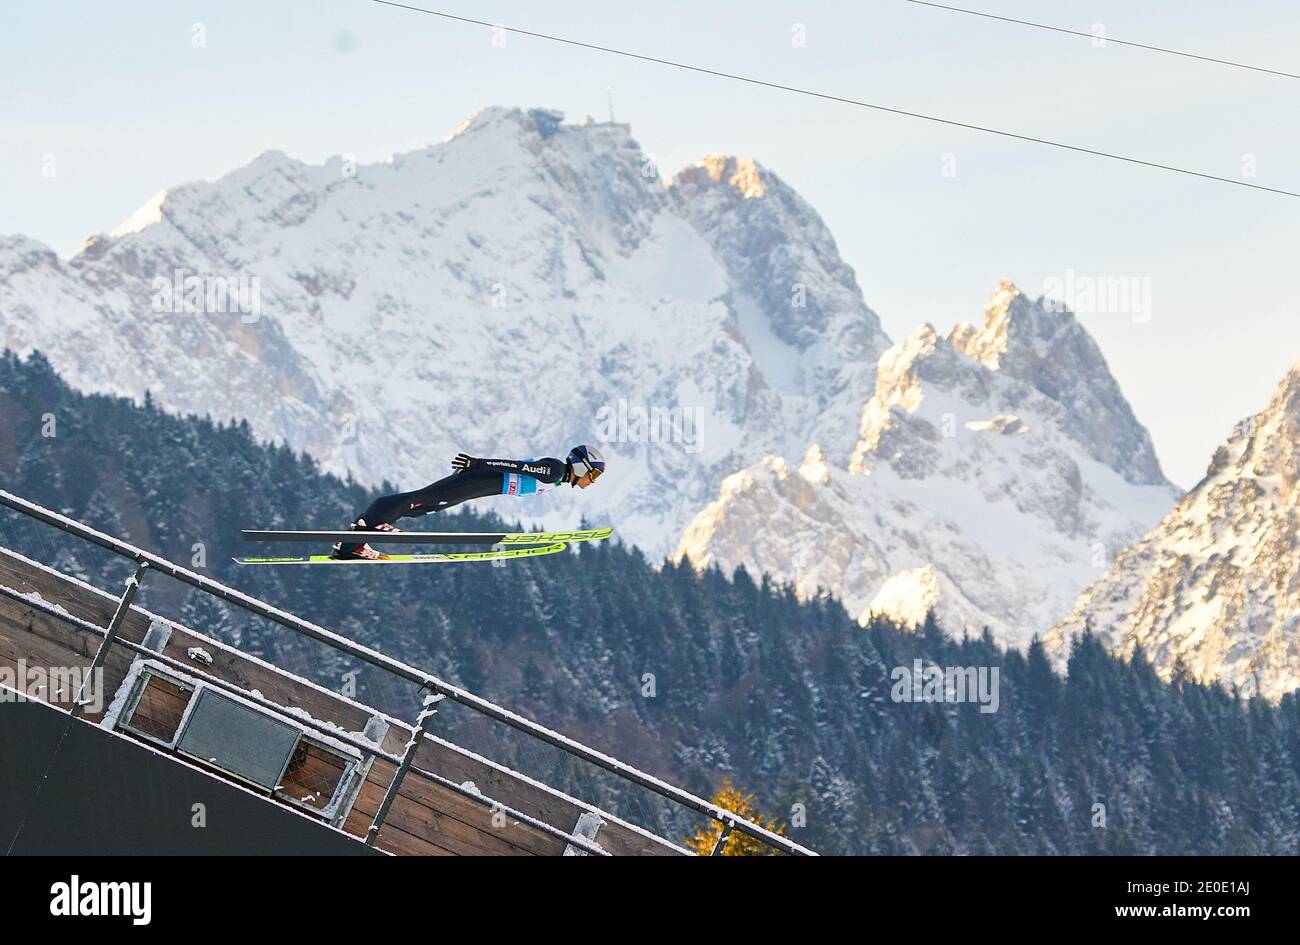 In front of Zugspitze mountain: Andreas WELLINGER, GER in action at the Four Hills Tournament Ski Jumping at Olympic Stadium, Grosse Olympiaschanze in Garmisch-Partenkirchen, Bavaria, Germany, December 31, 2020.  © Peter Schatz / Alamy Live News Stock Photo